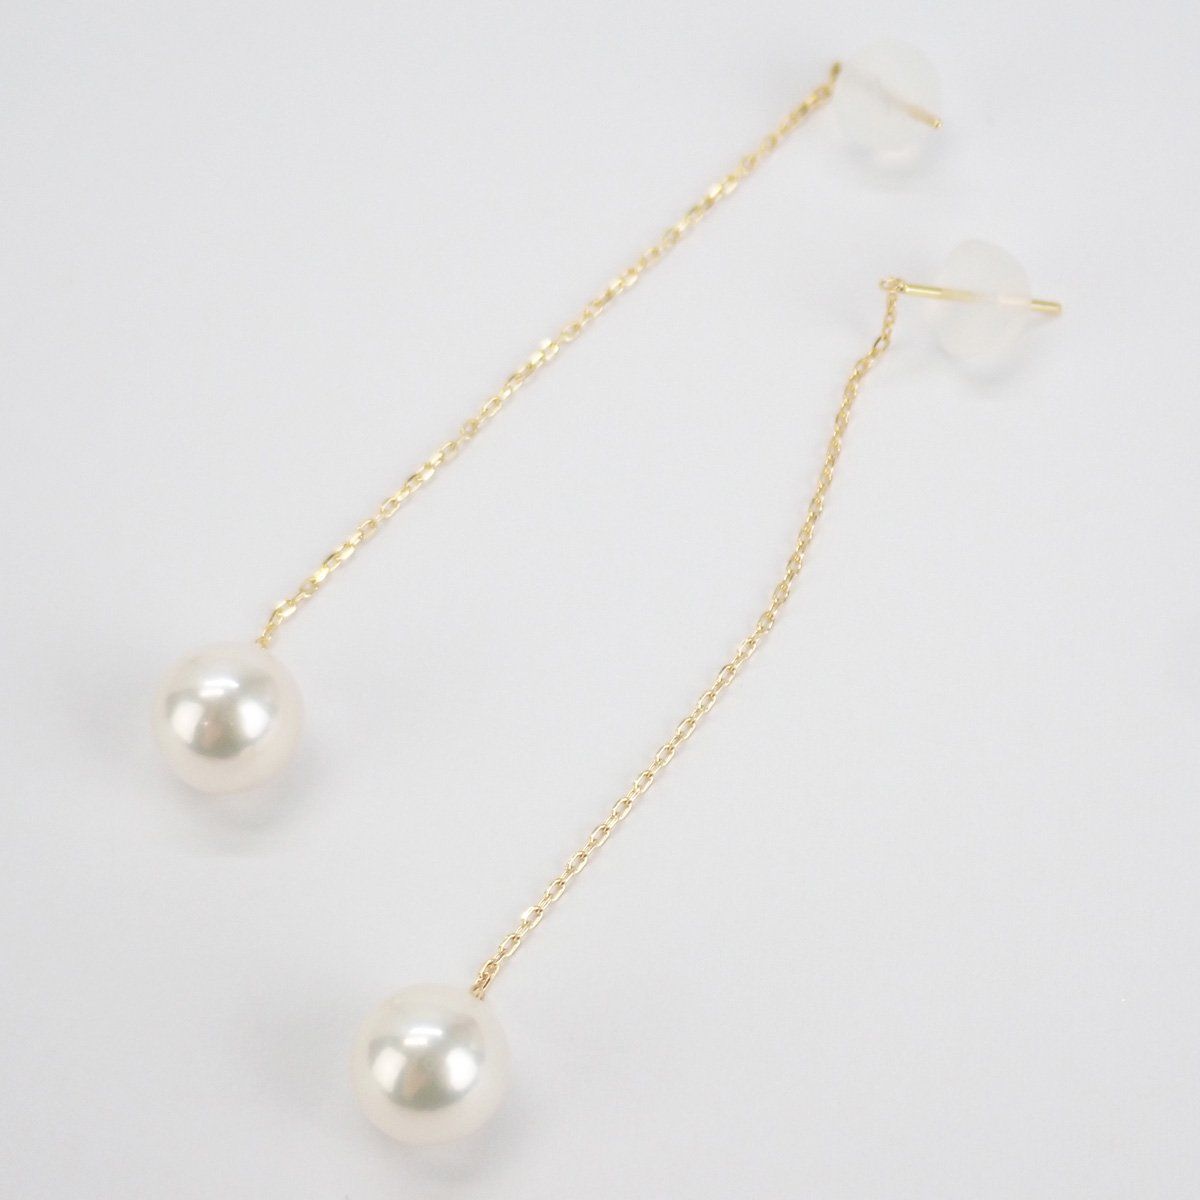 K18YG Women's Design Earrings with 7.5mm Akoya Pearl, White, Never-Used Pre-Owned Item